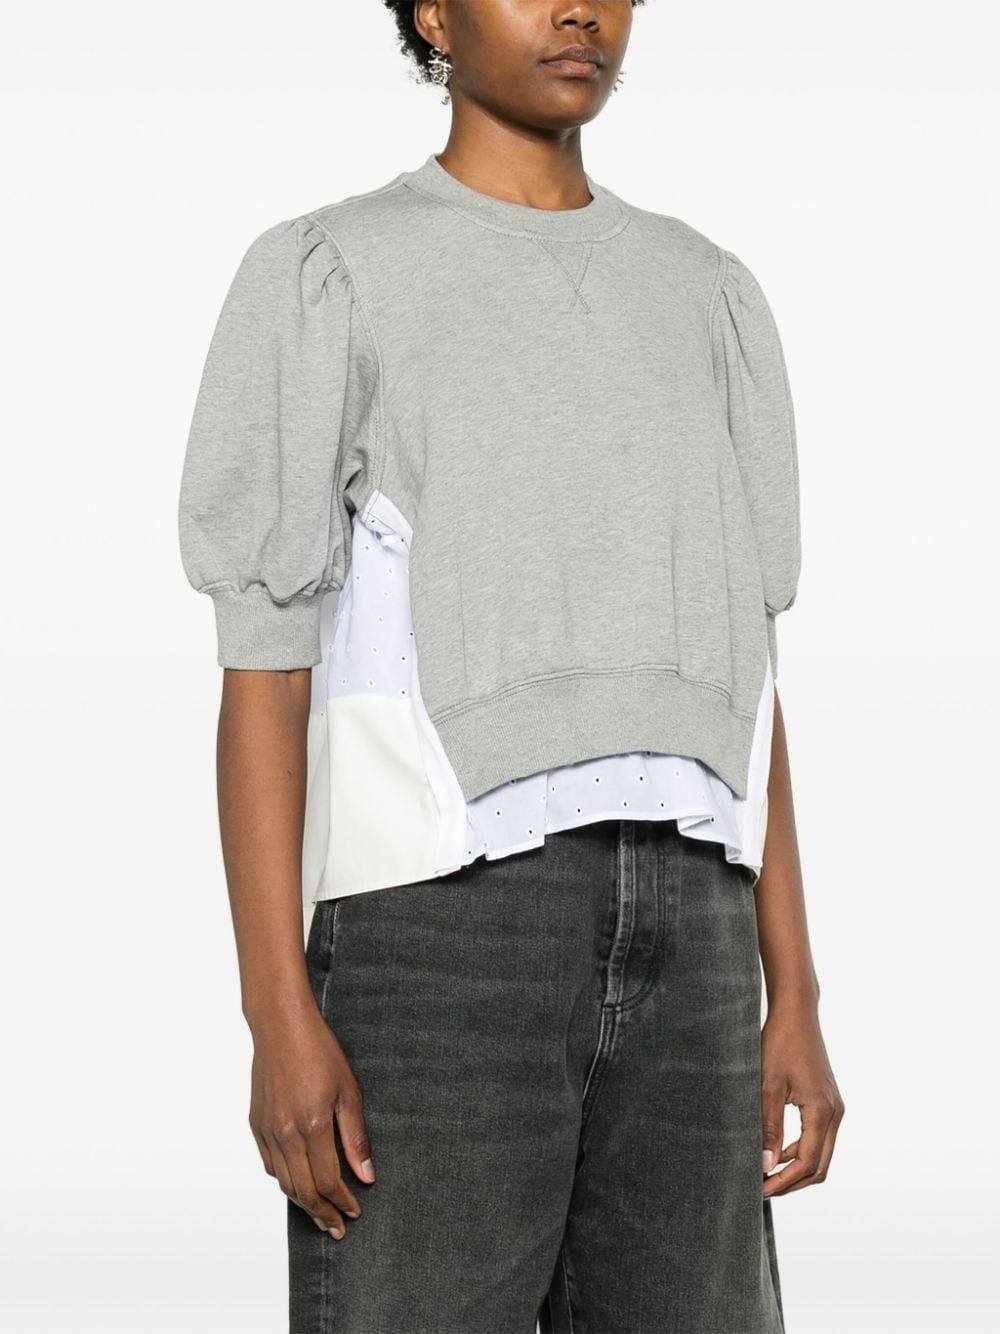 broderie-anglaise cropped sweatshirt - 6